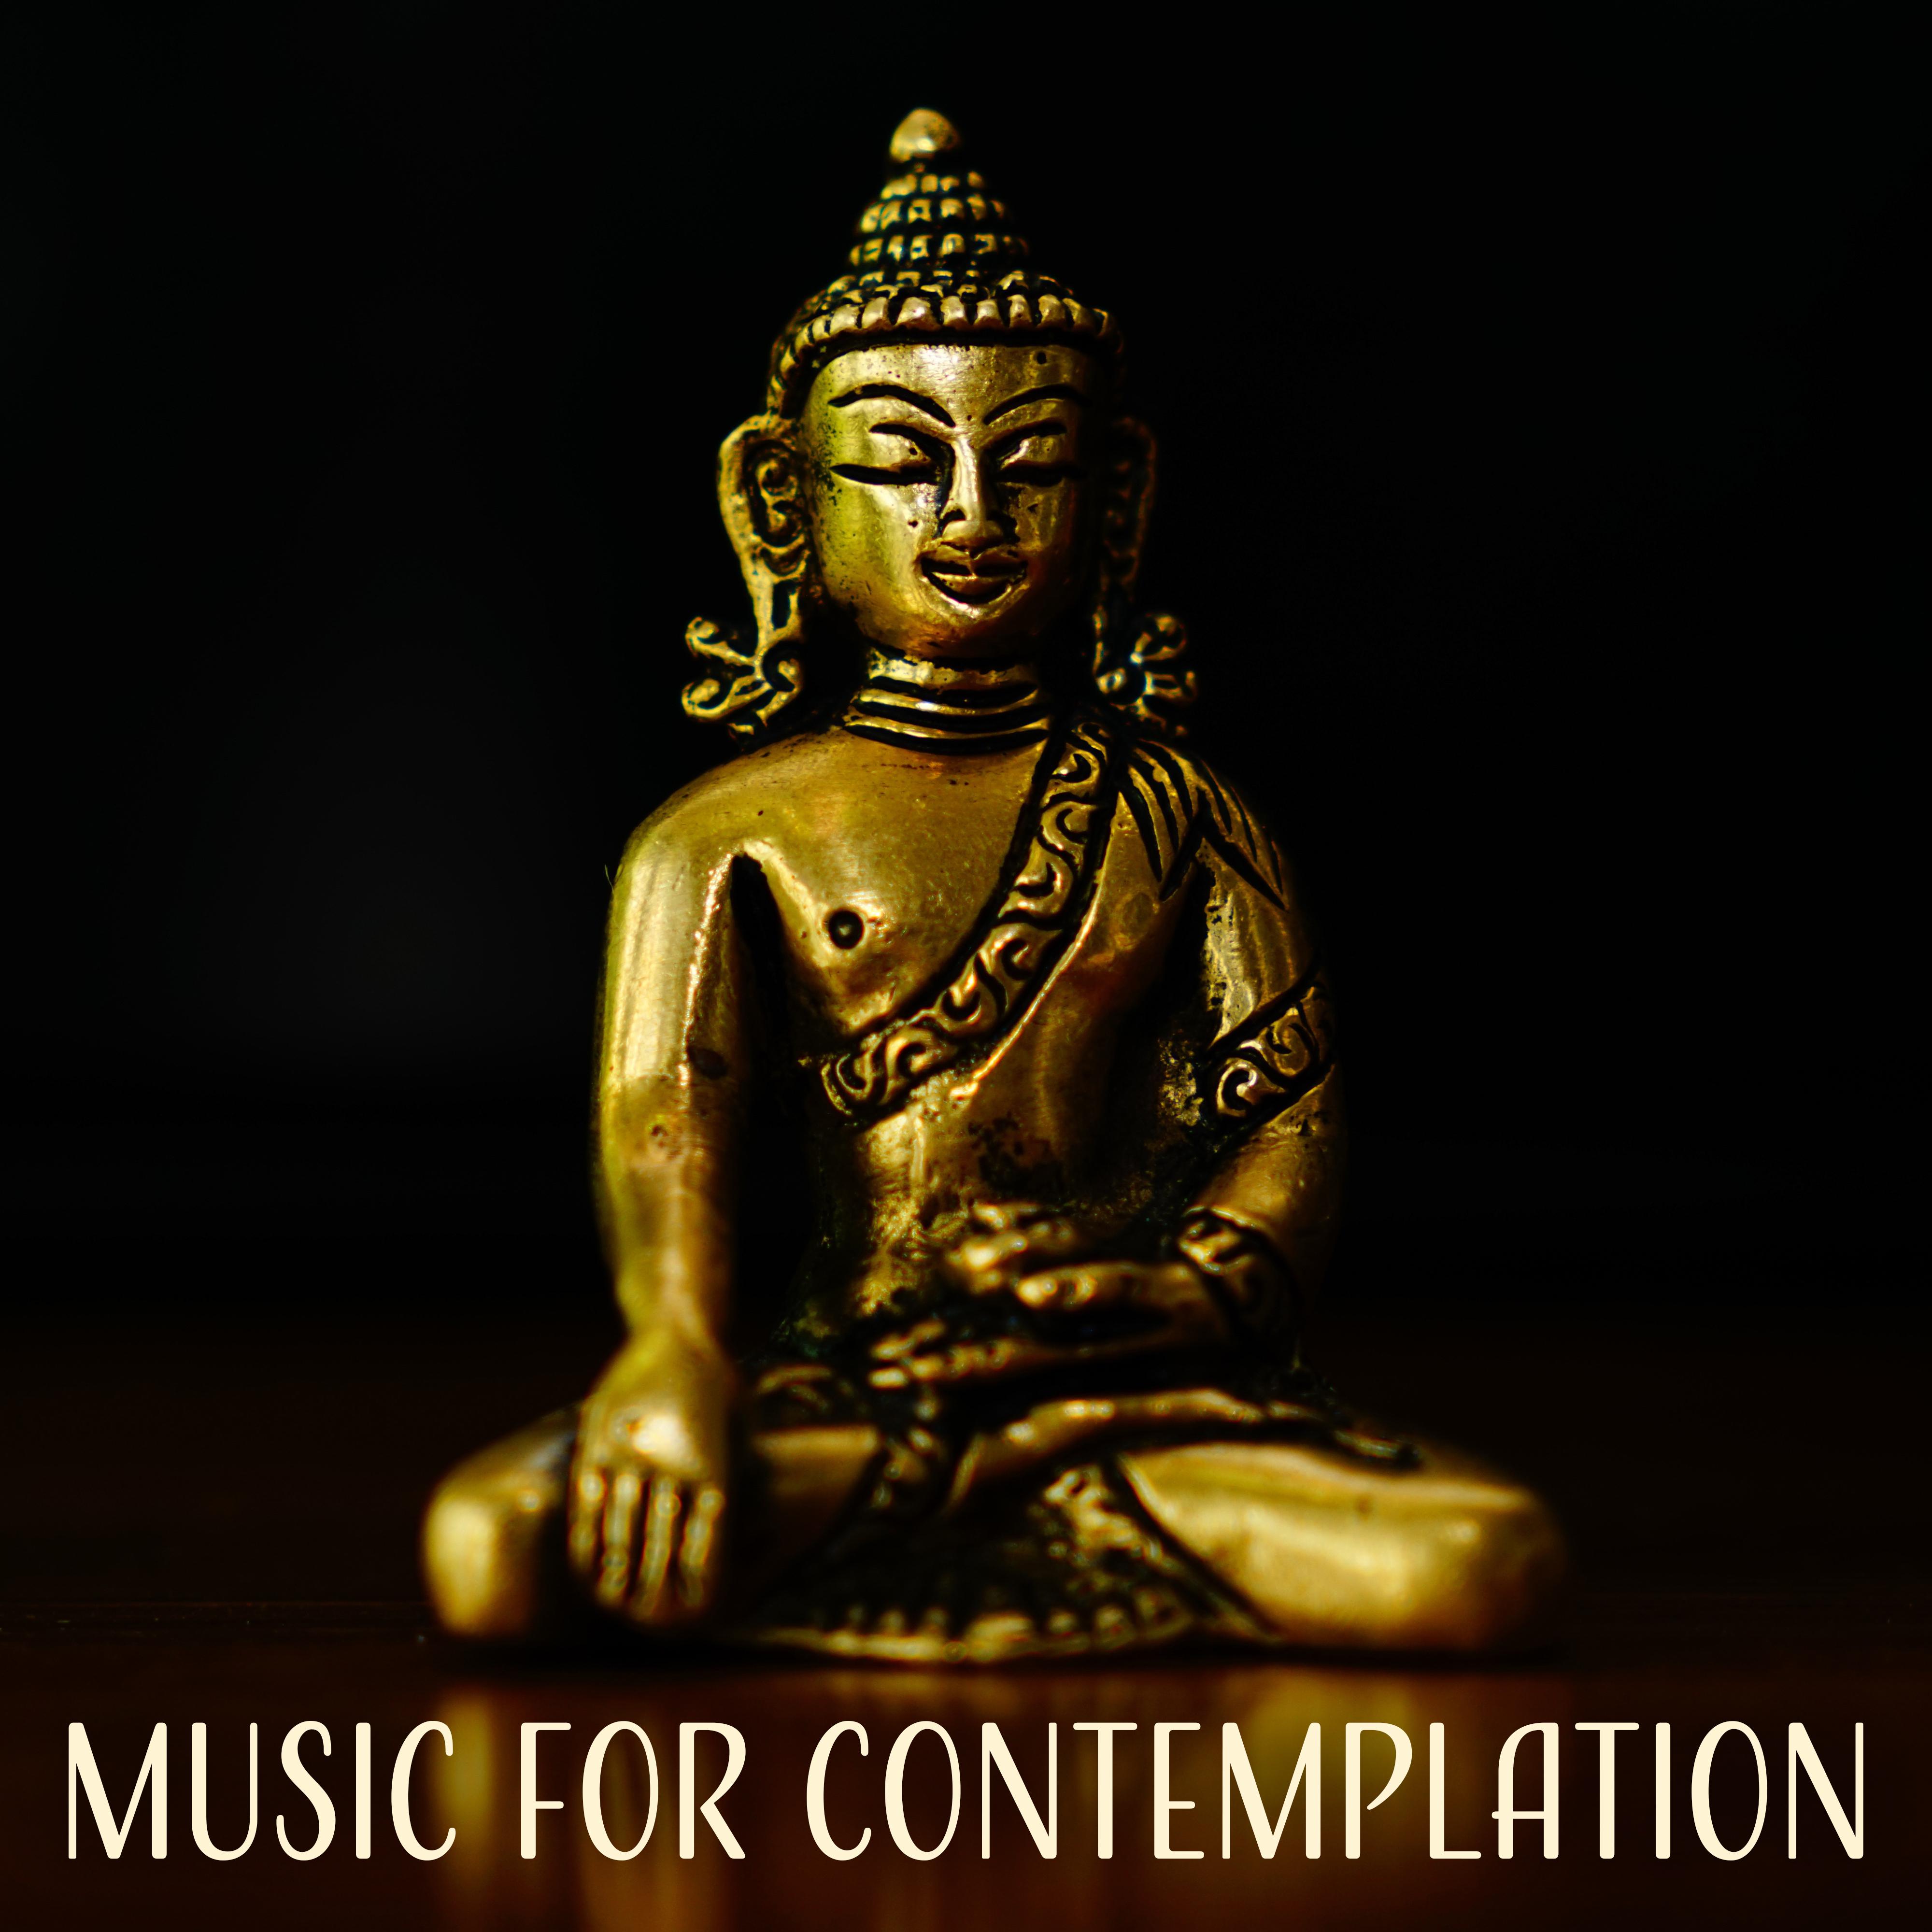 Music for Contemplation – New Age Music for Meditation, Yoga Music, Mindfulness, Deep Contemplation, Calming Sounds of Nature, Relaxing Music